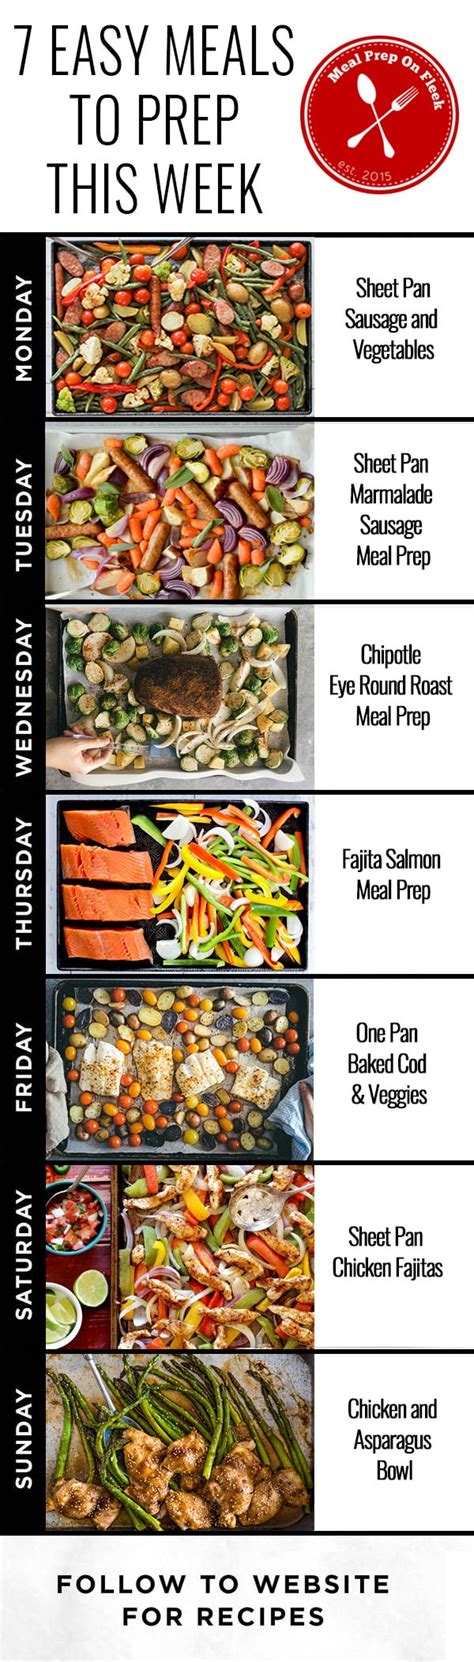 easy meals to meal prep this week